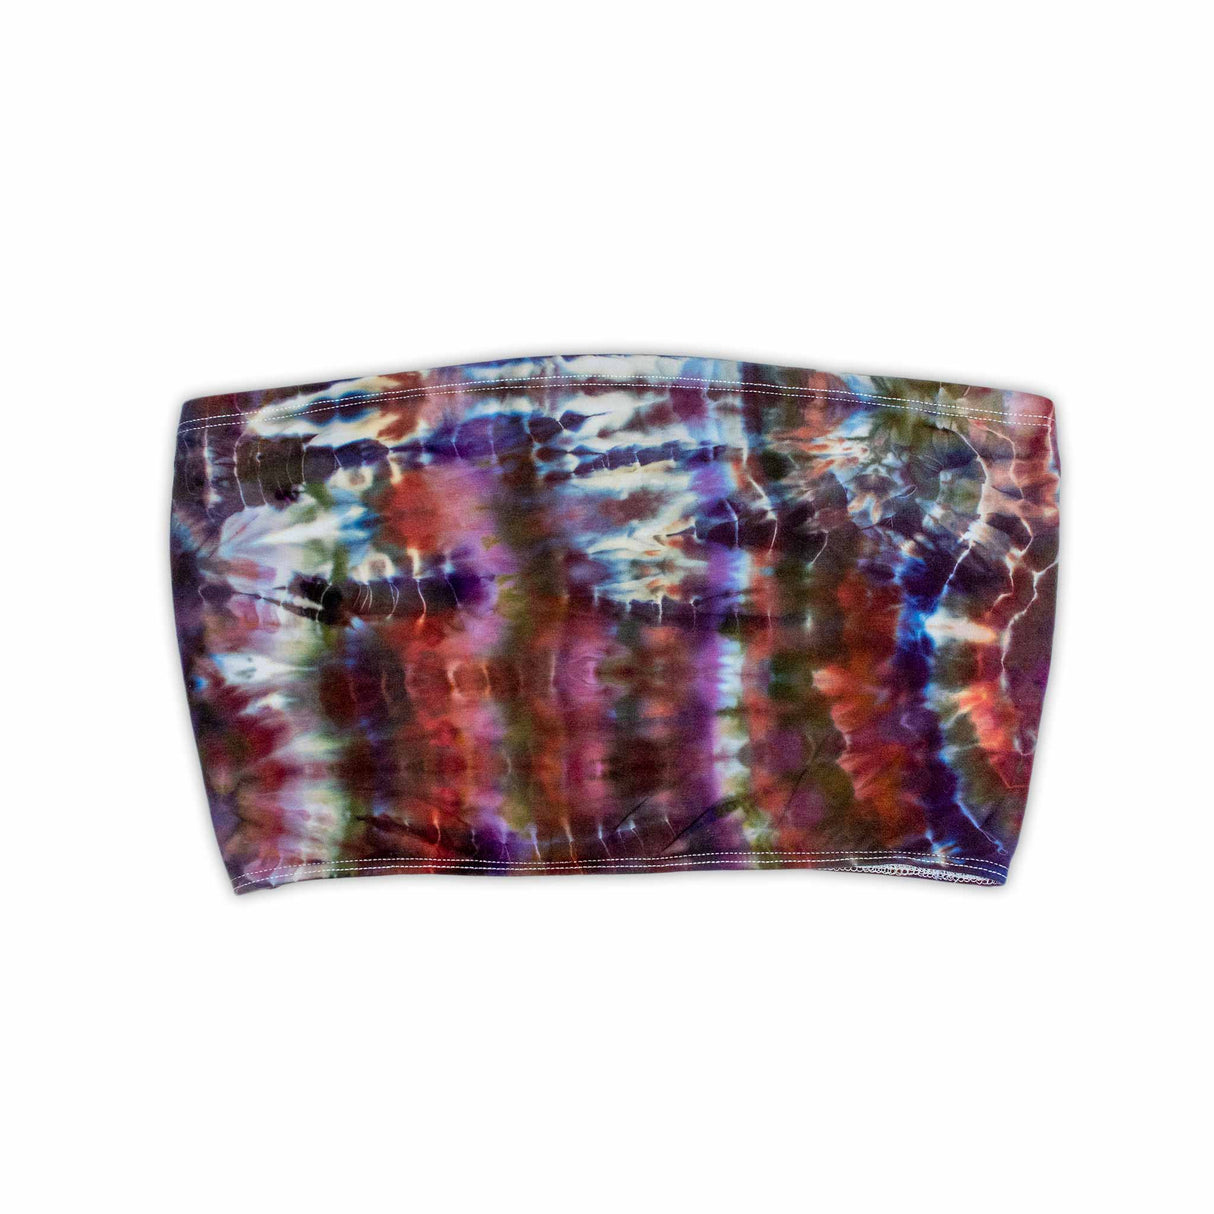 An ice-dyed bandeau top displaying an electric blend of cobalt blue, magenta, and plum, mimicking the natural marbling of semi-precious stones.